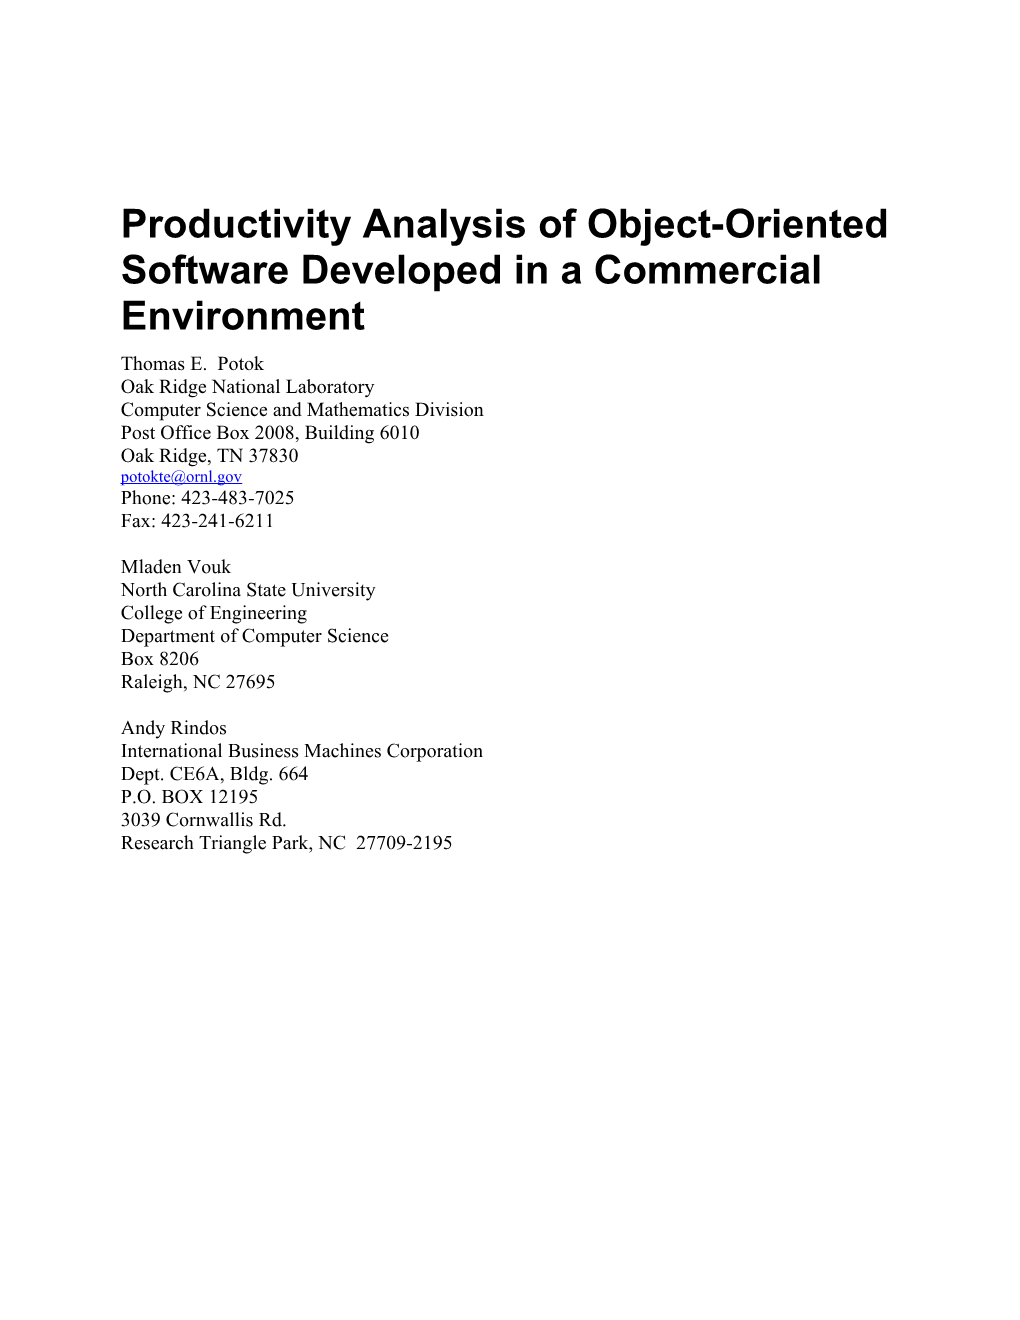 Productivity of Commercial Software Developed Using Object-Oriented Methods